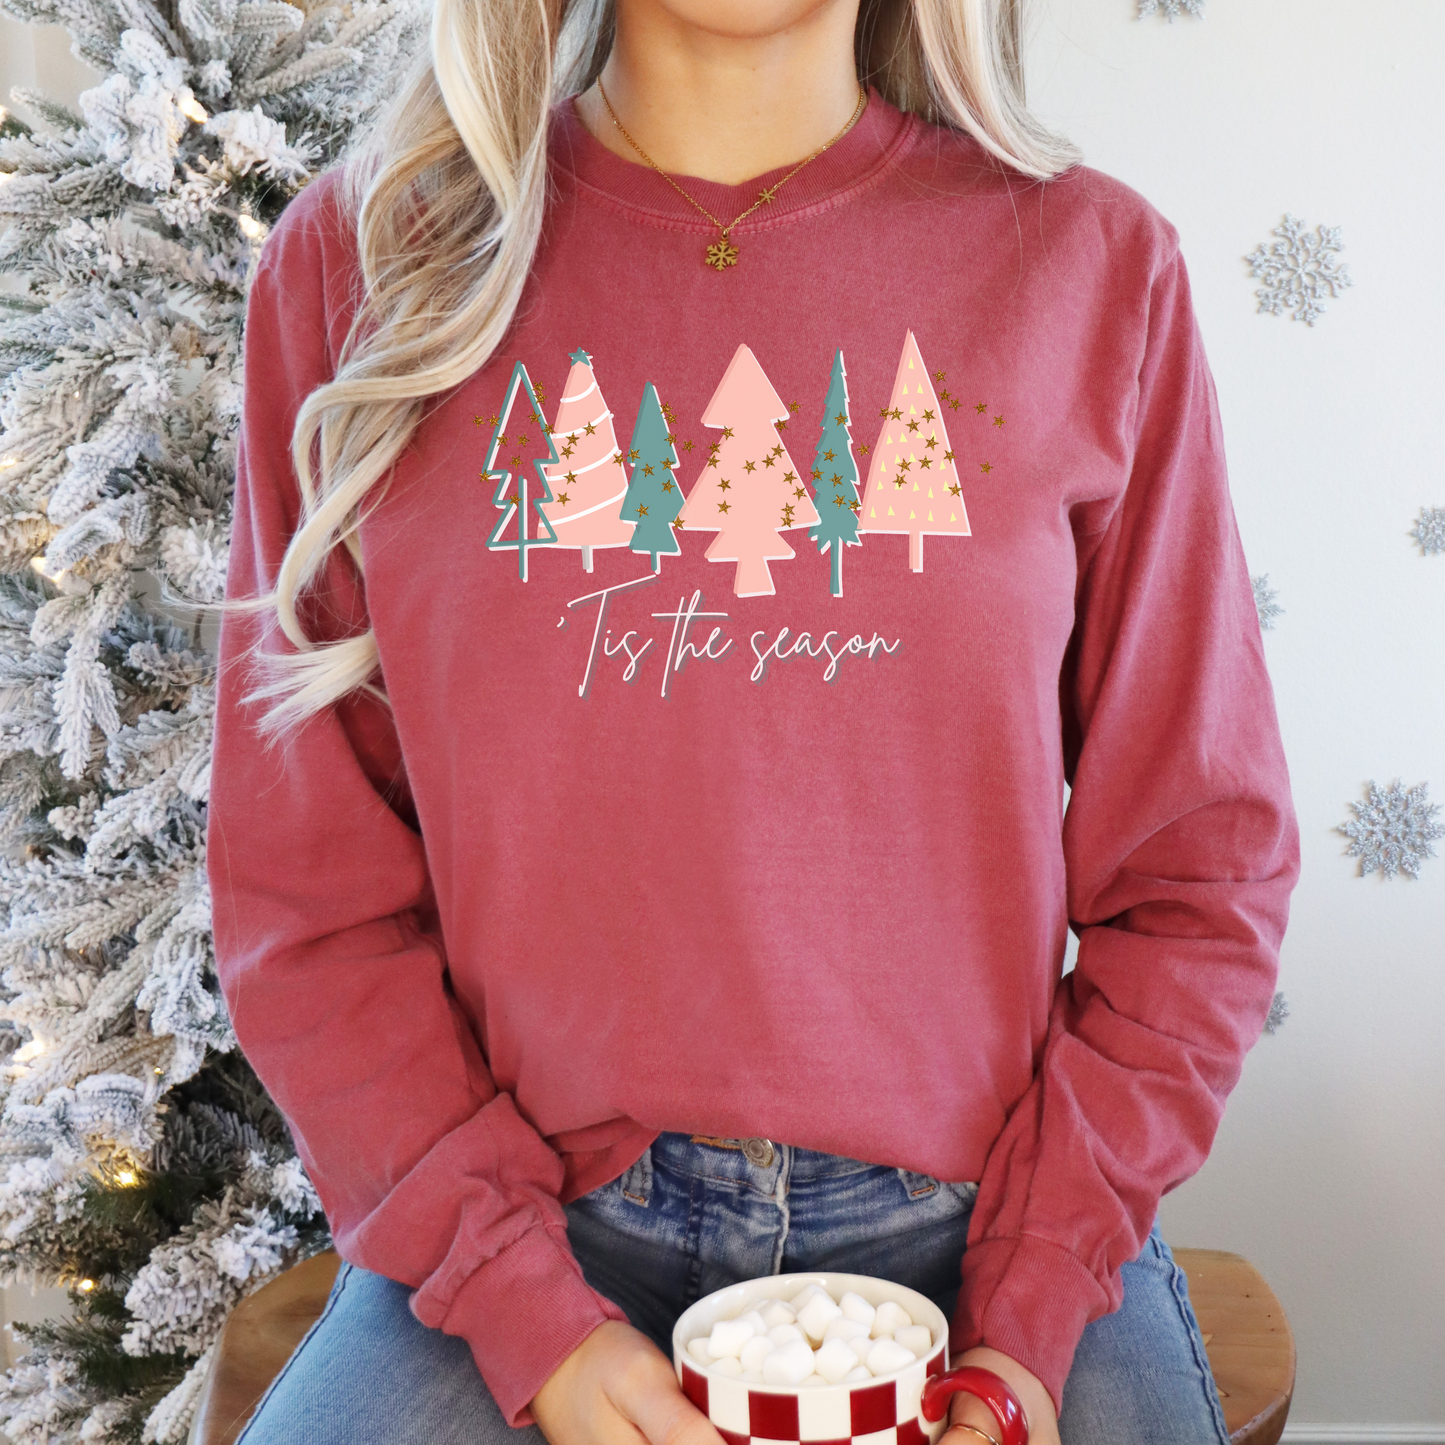 Stay warm and trendy this winter with our cozy and stylish Women's 'Tis the Season Crimson Red Christmas Tree Shirt by Comfort Colors, perfect for adding a festive touch to your winter wardrobe. Available through Printify.